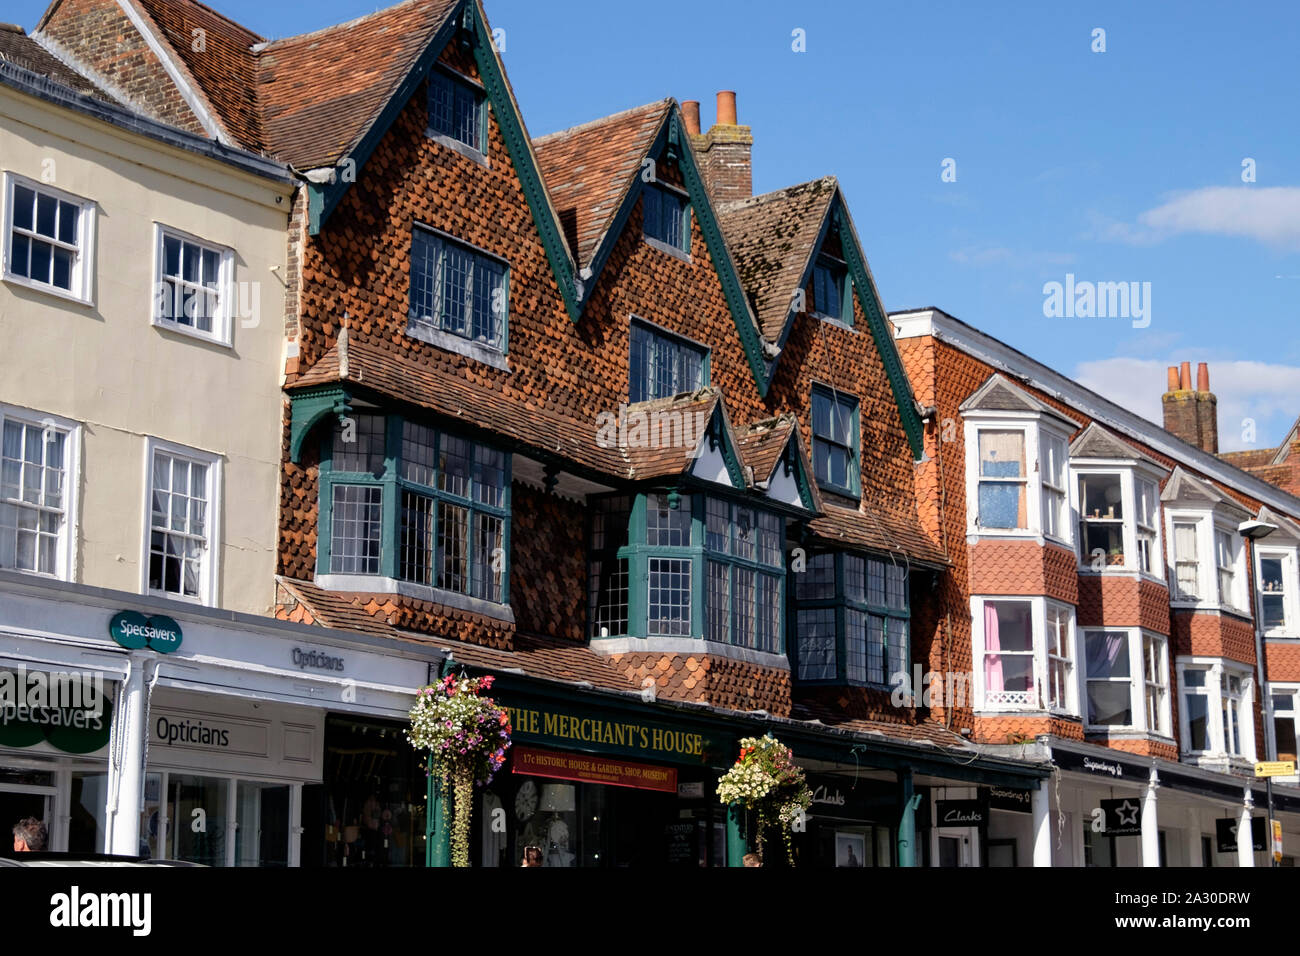 View of rooftops along the High St of Marlborough, a Market Town In Wiltshire UK. The Merchants House Stock Photo